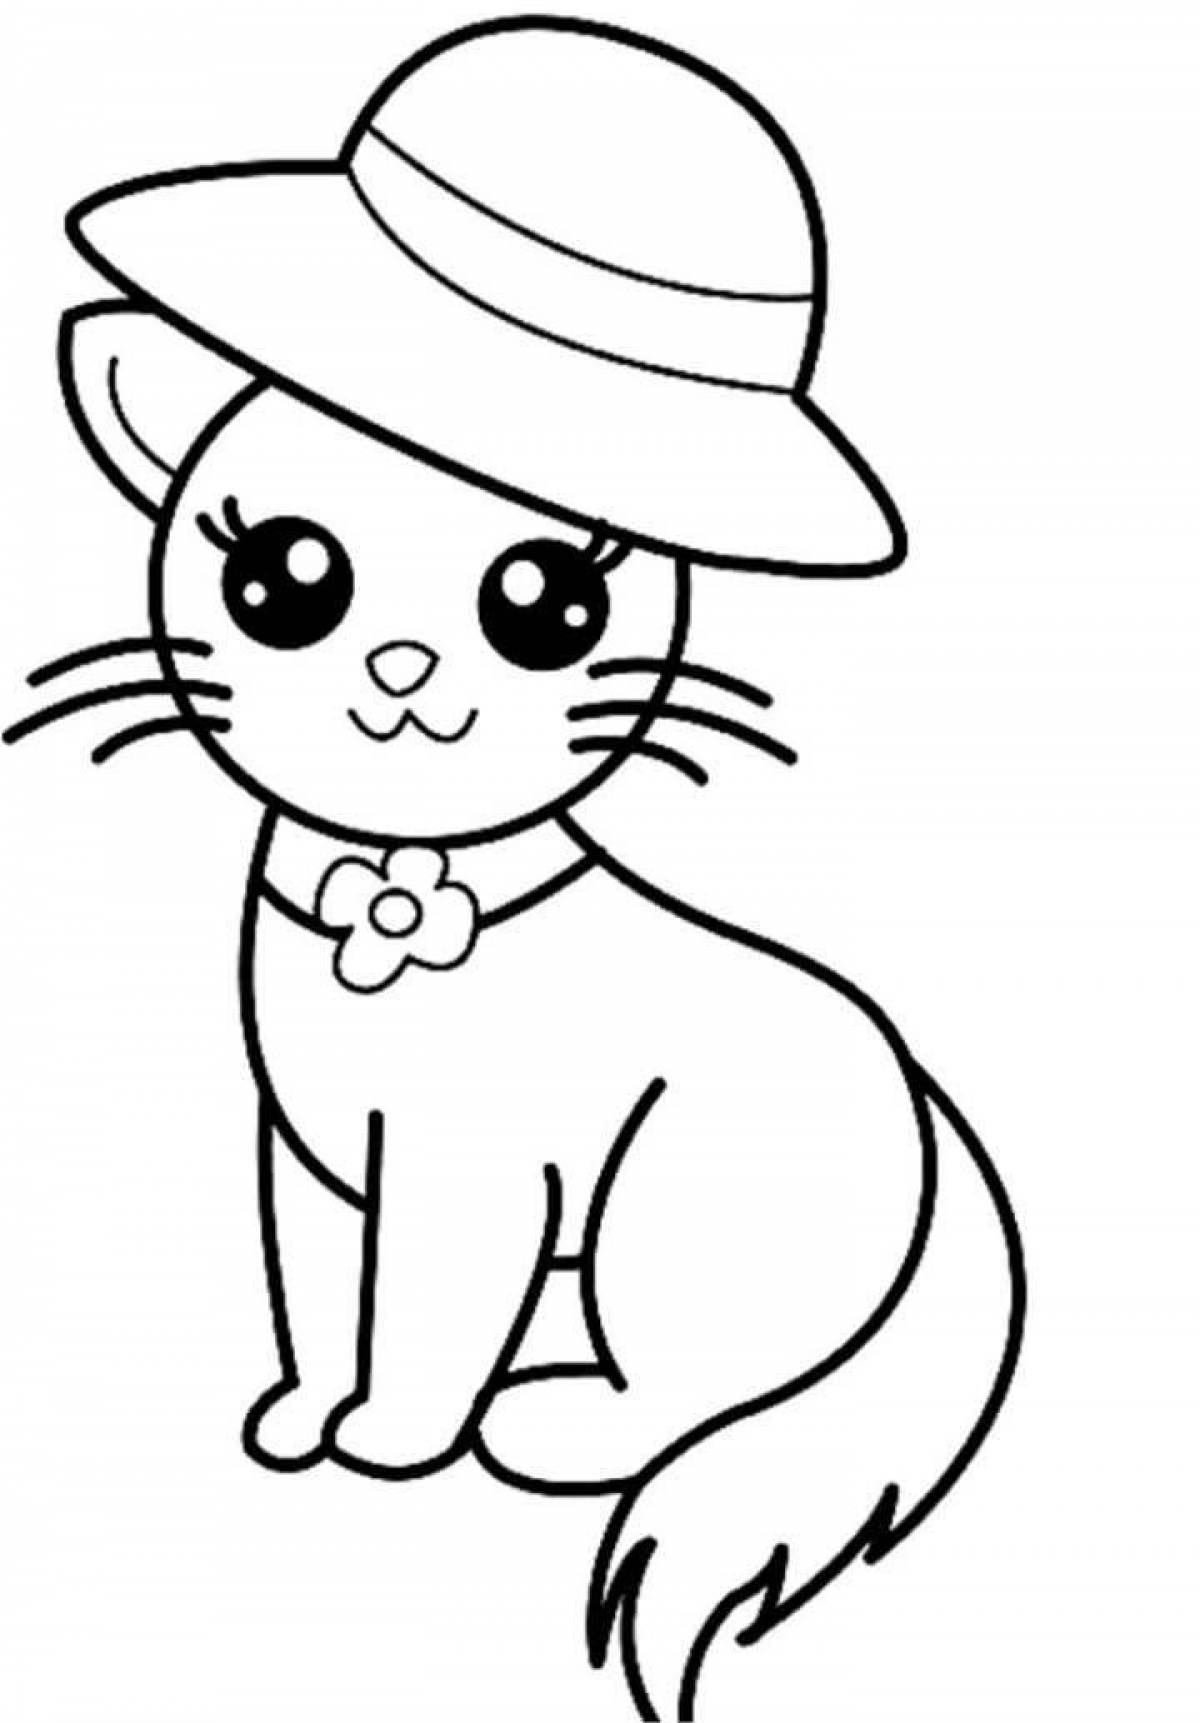 Fabulous cat coloring page for kids